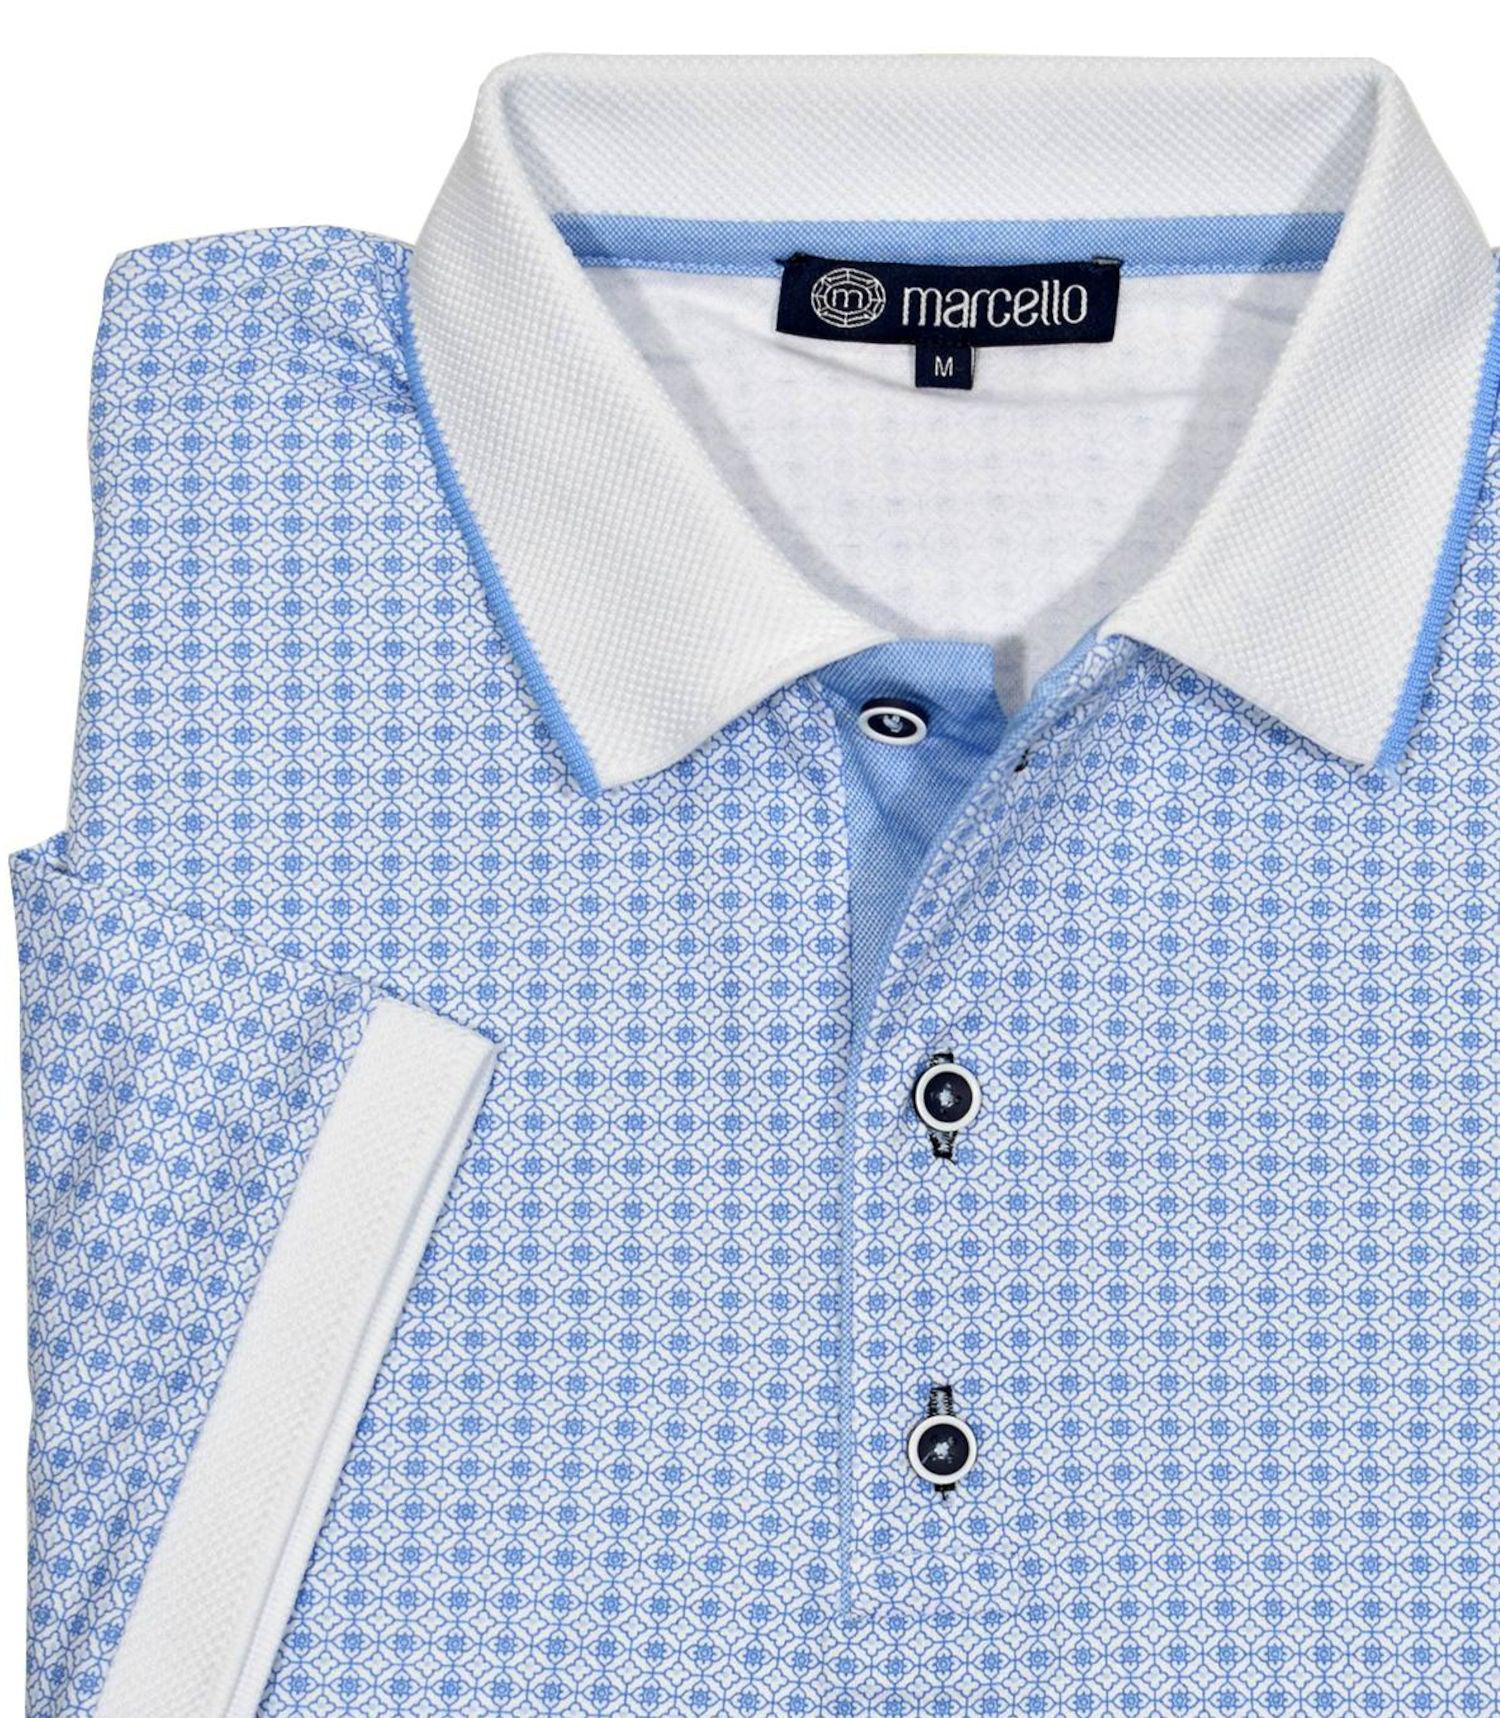 Ultra soft mercerized cotton is the ultimate in comfort and style. Ultimate cotton fabric. Updated traditional printed pattern. Trend collar with contrast detailing. Custom buttons. Modern fit. Polo by Marcello Sport